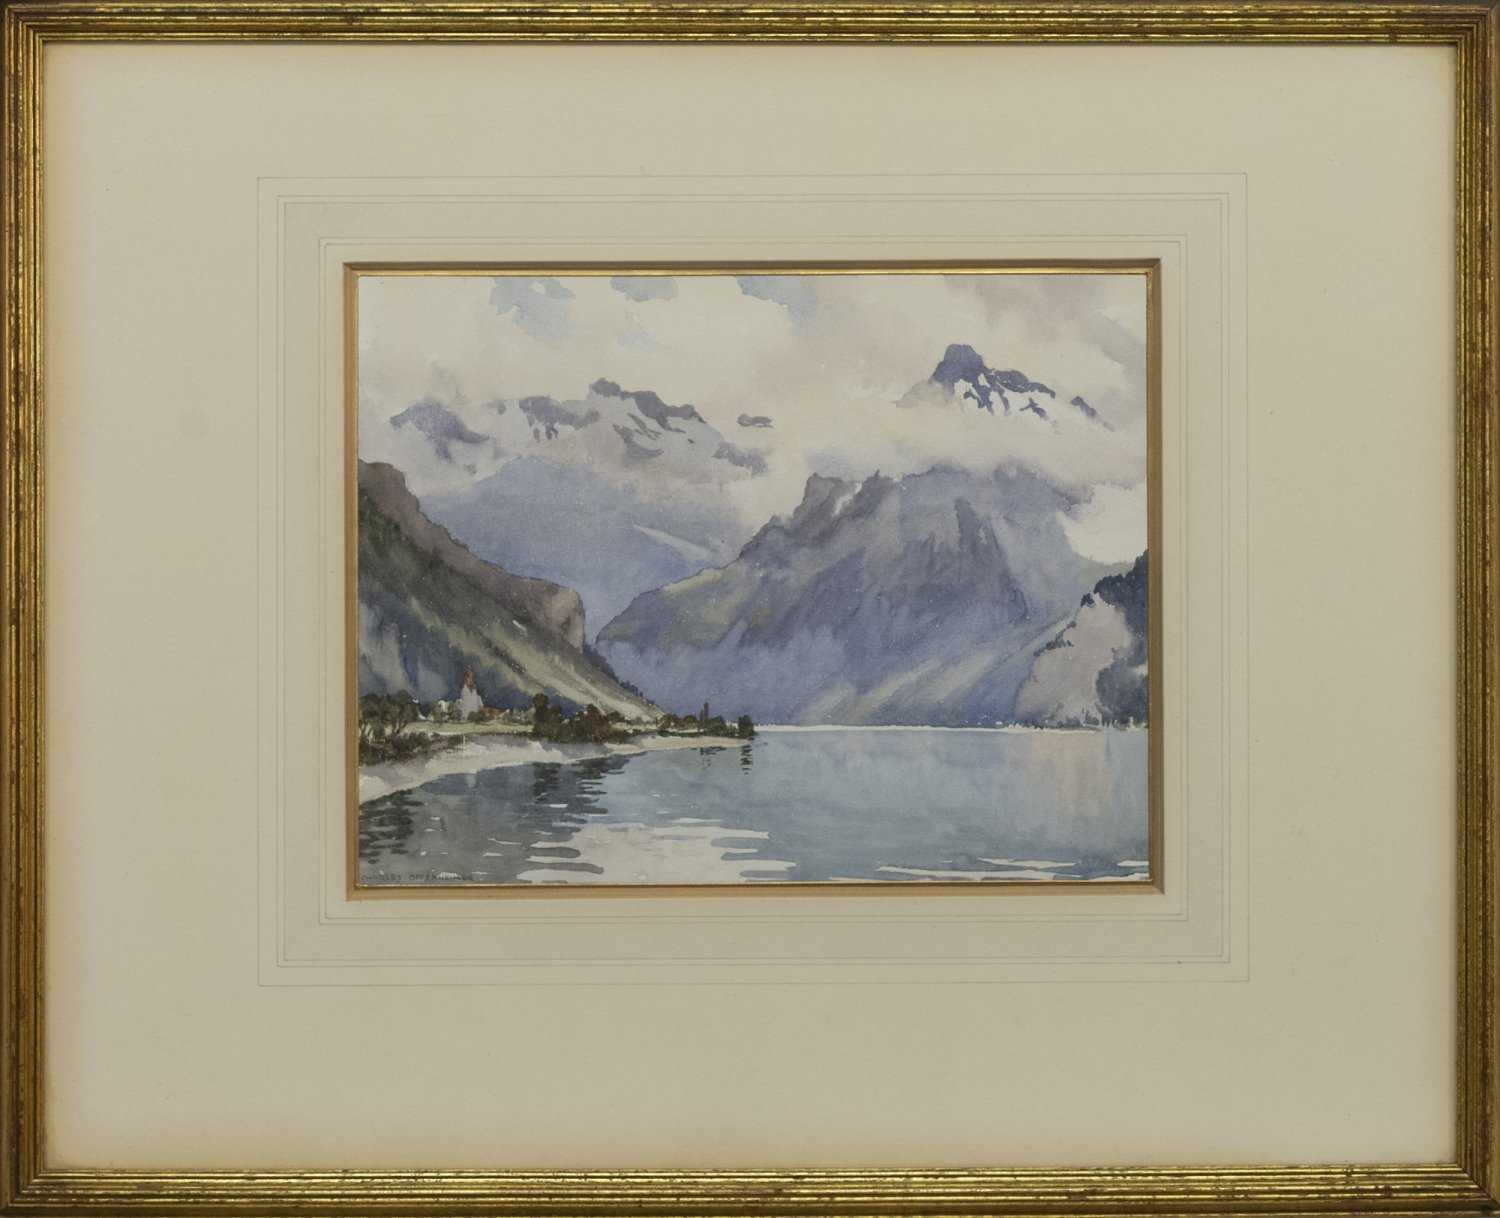 Lot 139 - HEAD OF LAKE LUCERNE, A WATERCOLOUR BY CHARLES OPPENHEIMER